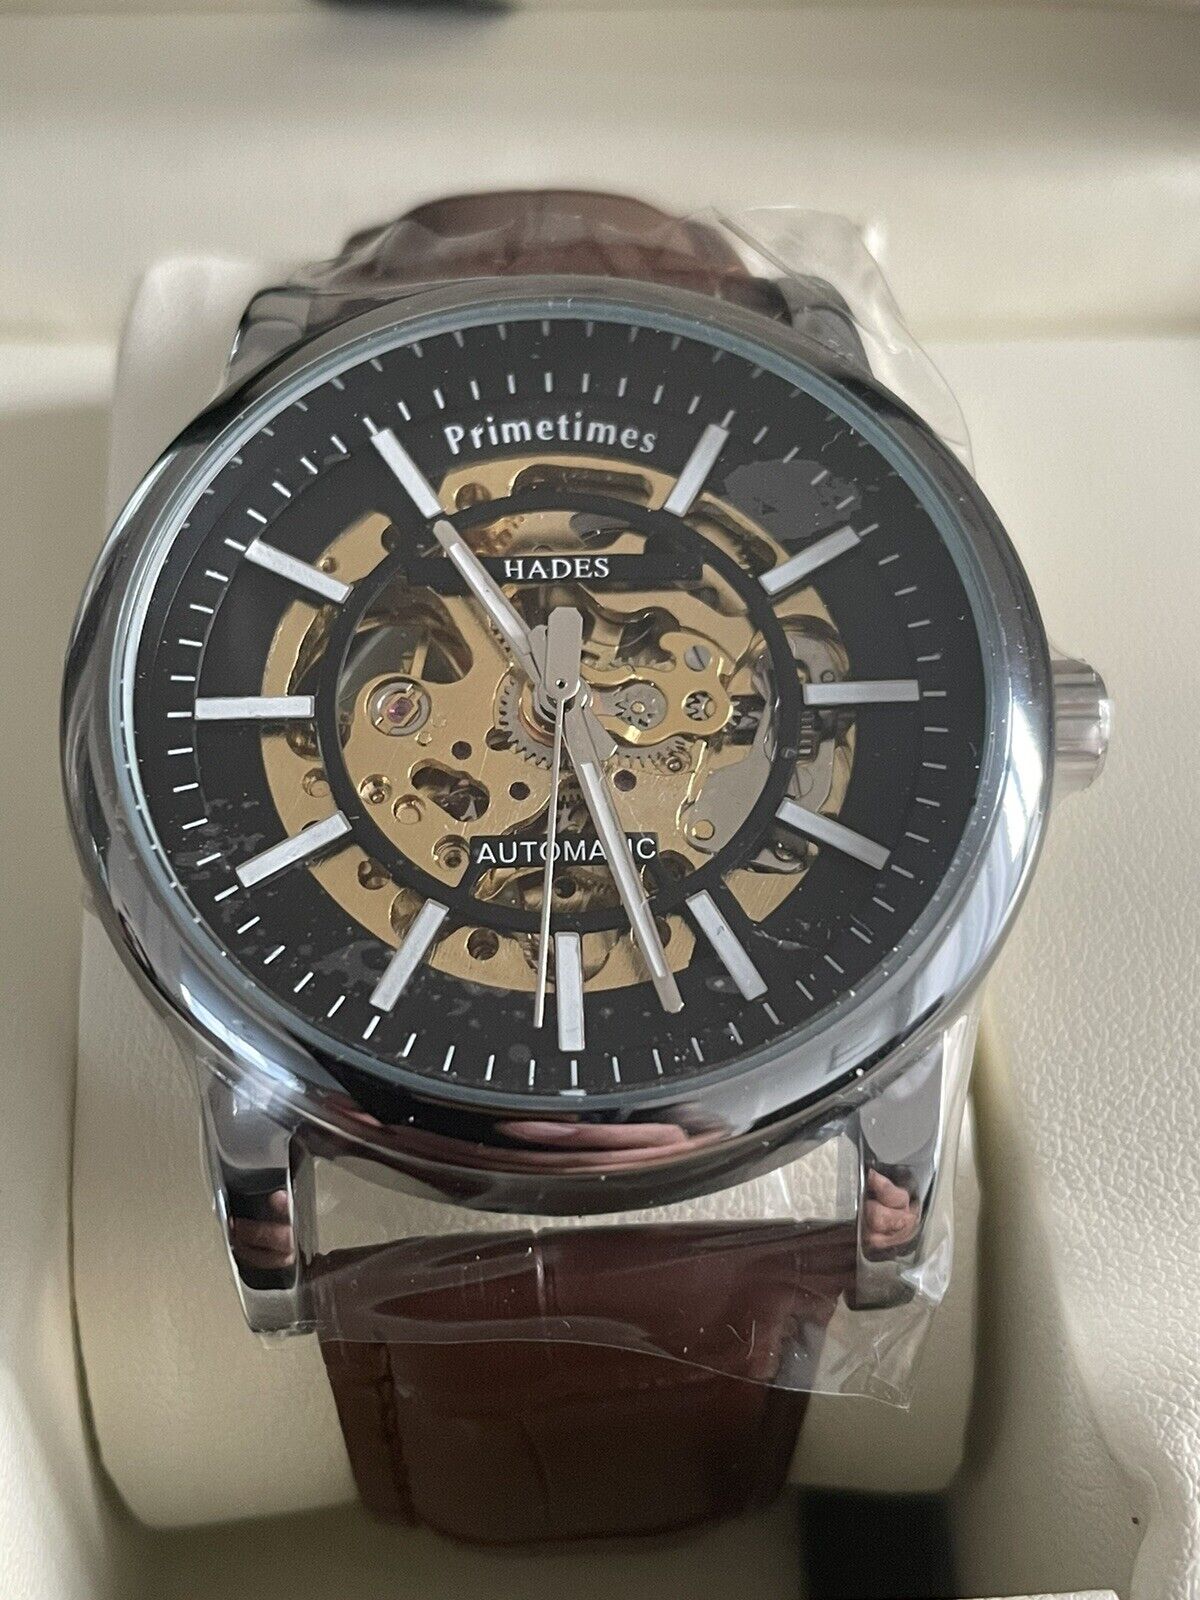 New Primetimes HADES Automatic watch #PT1938 (Brown Leather Strap) - Westies Watches